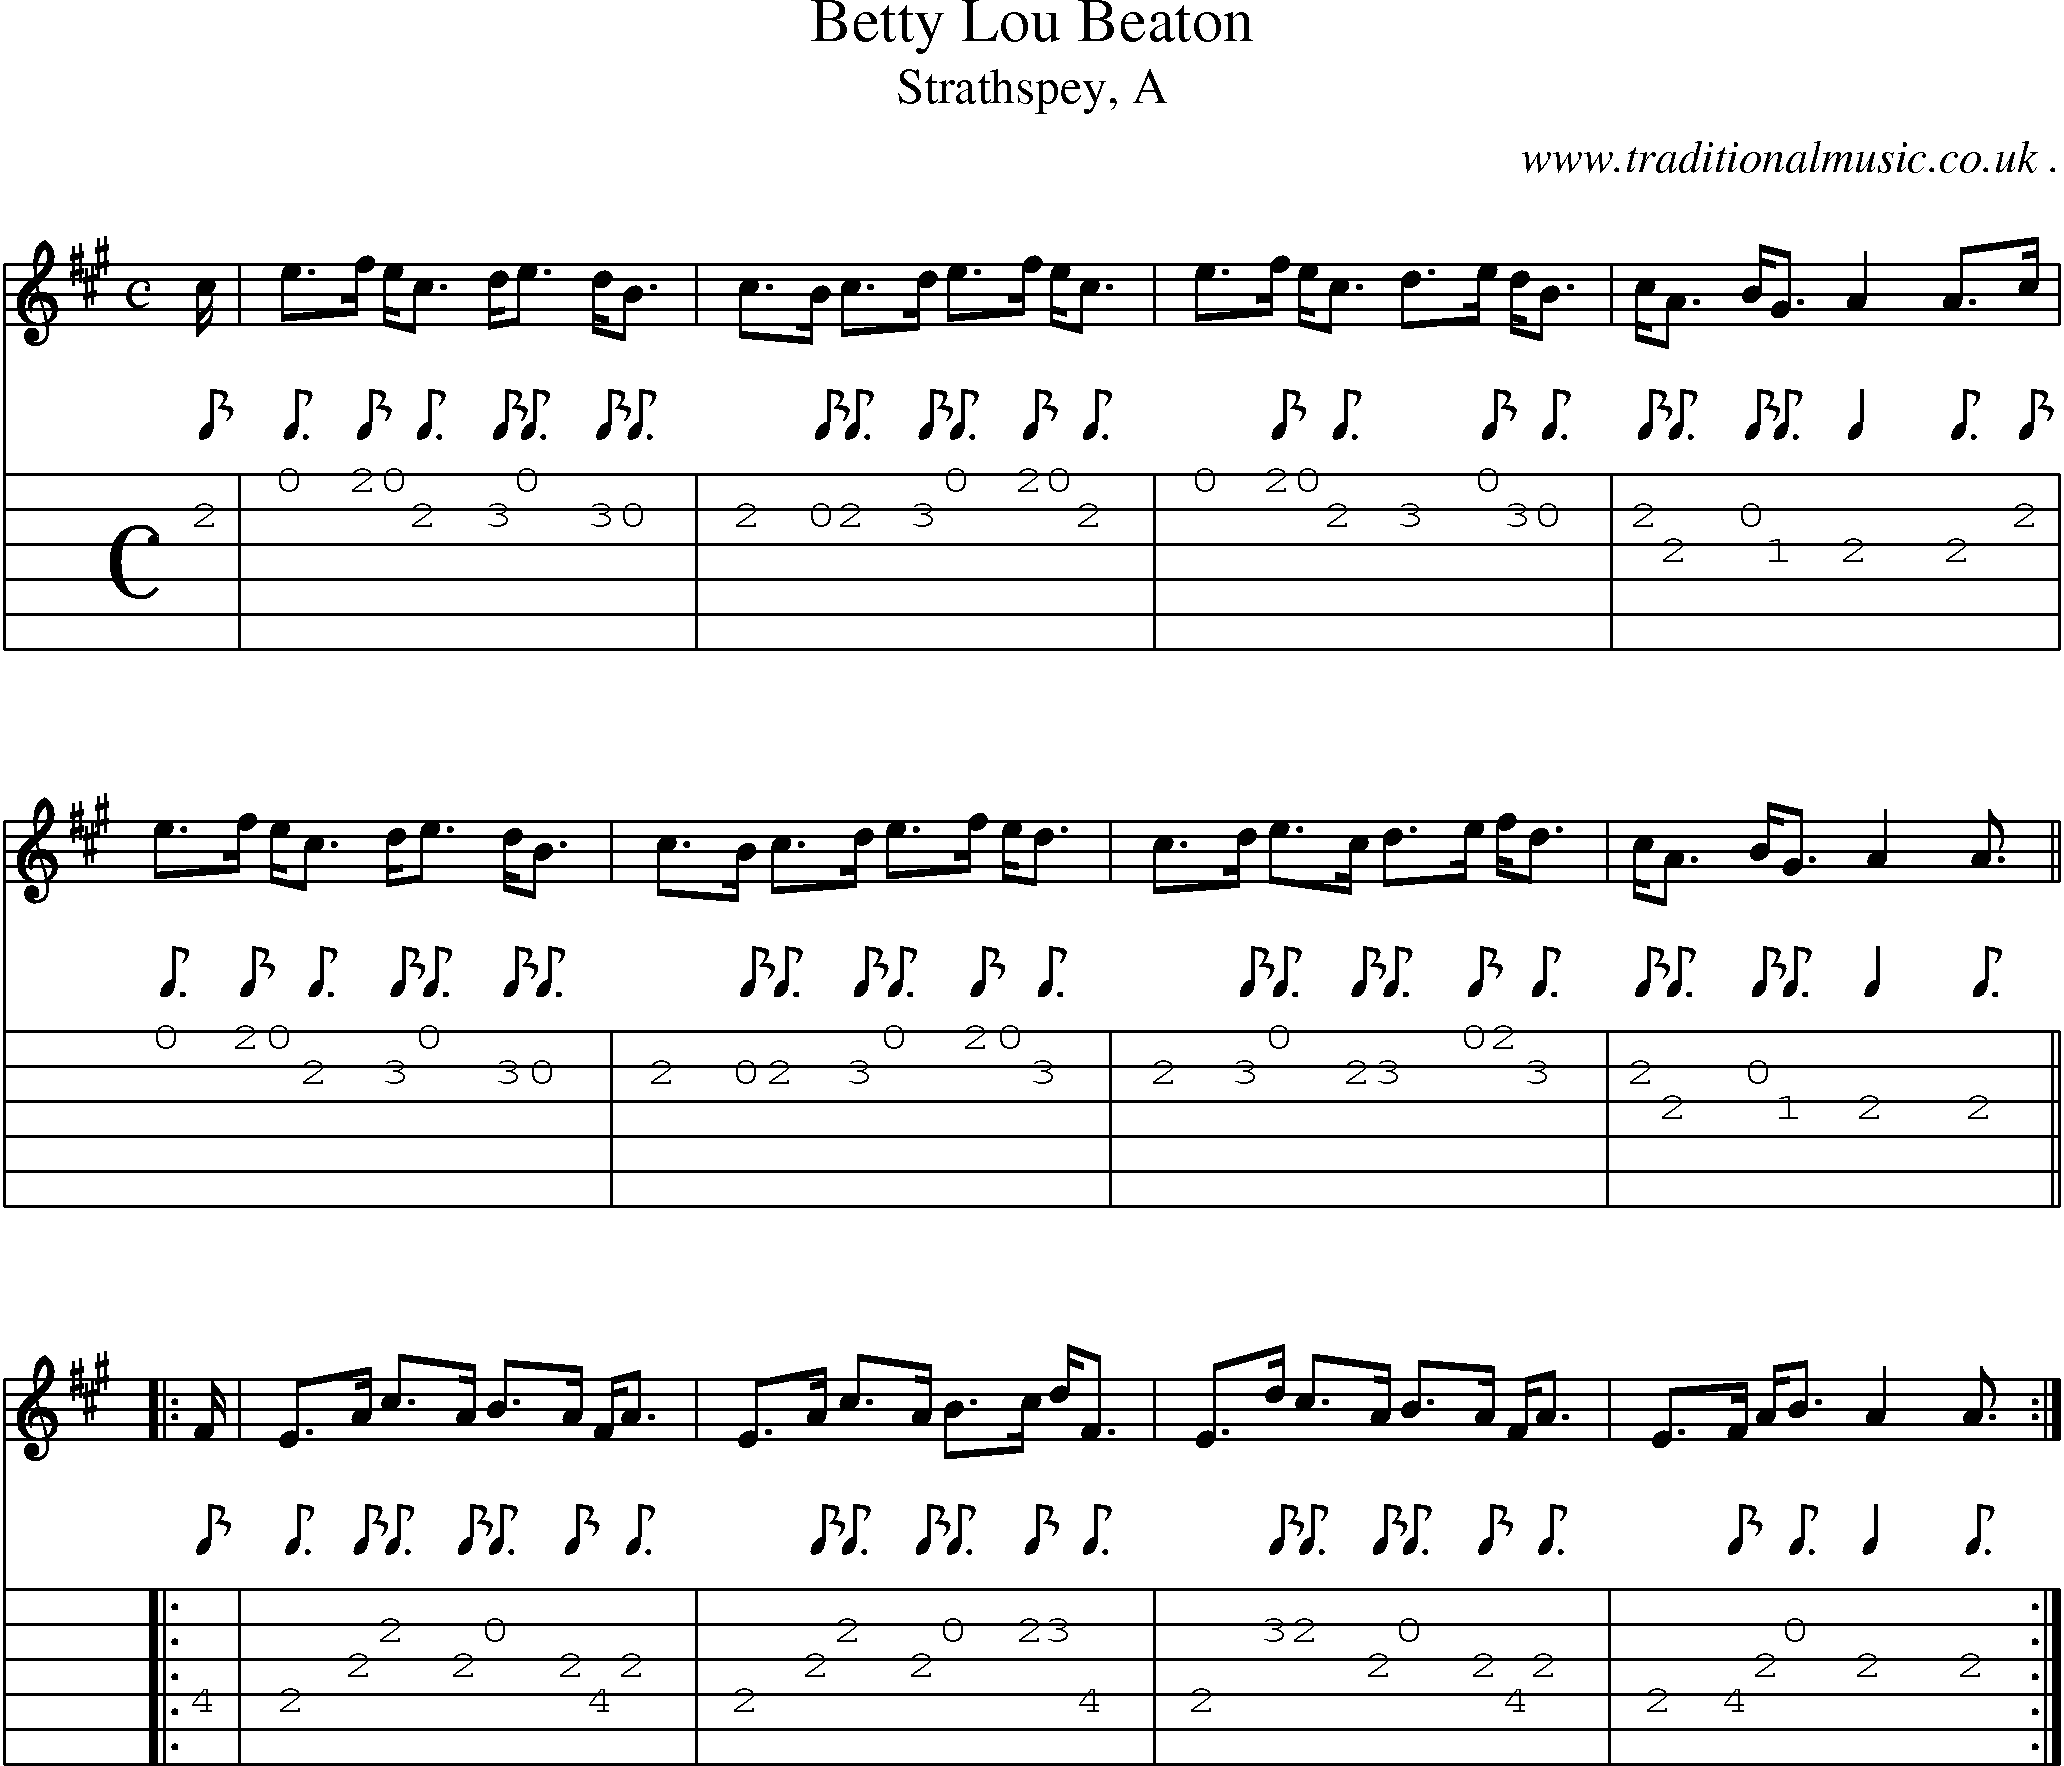 Sheet-music  score, Chords and Guitar Tabs for Betty Lou Beaton